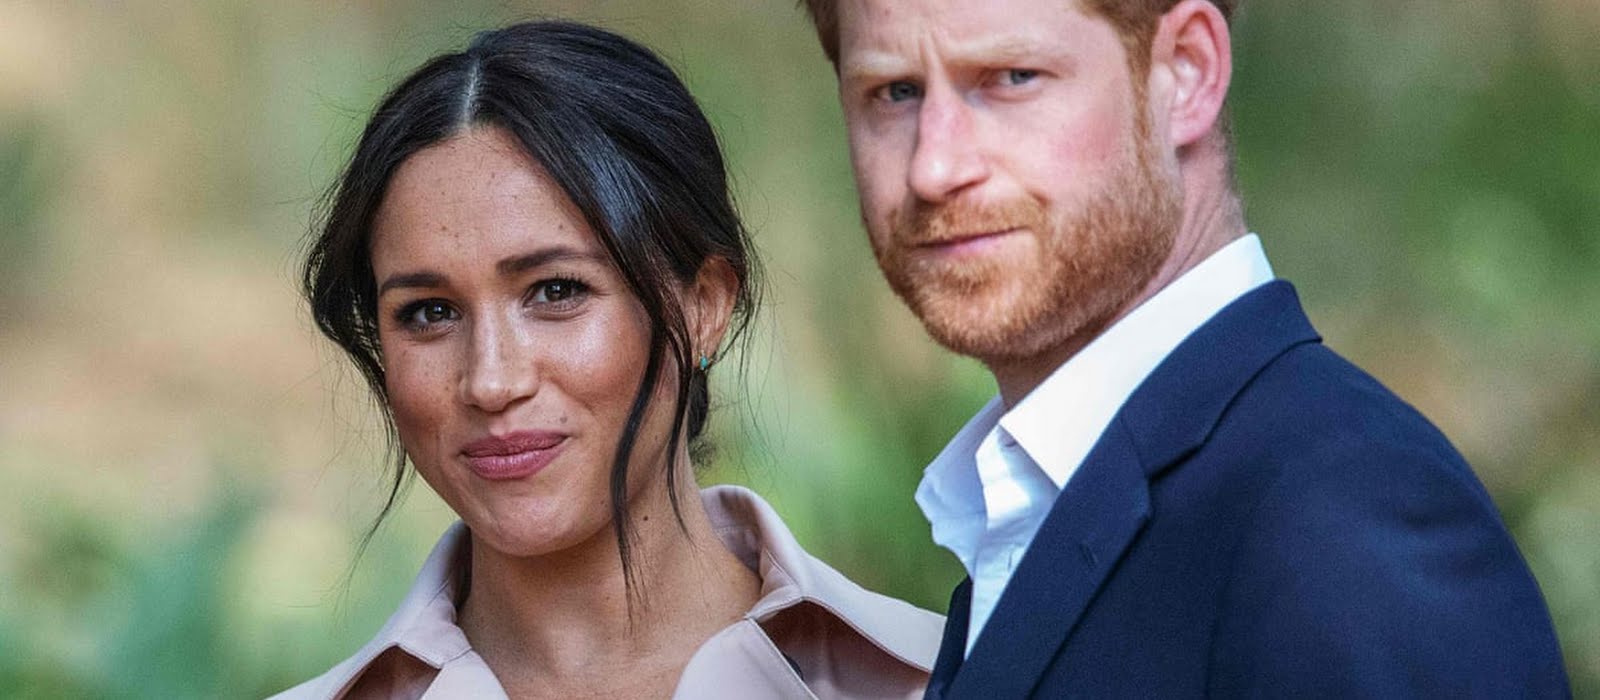 Meghan Markle and Prince Harry had no choice but to go on Oprah